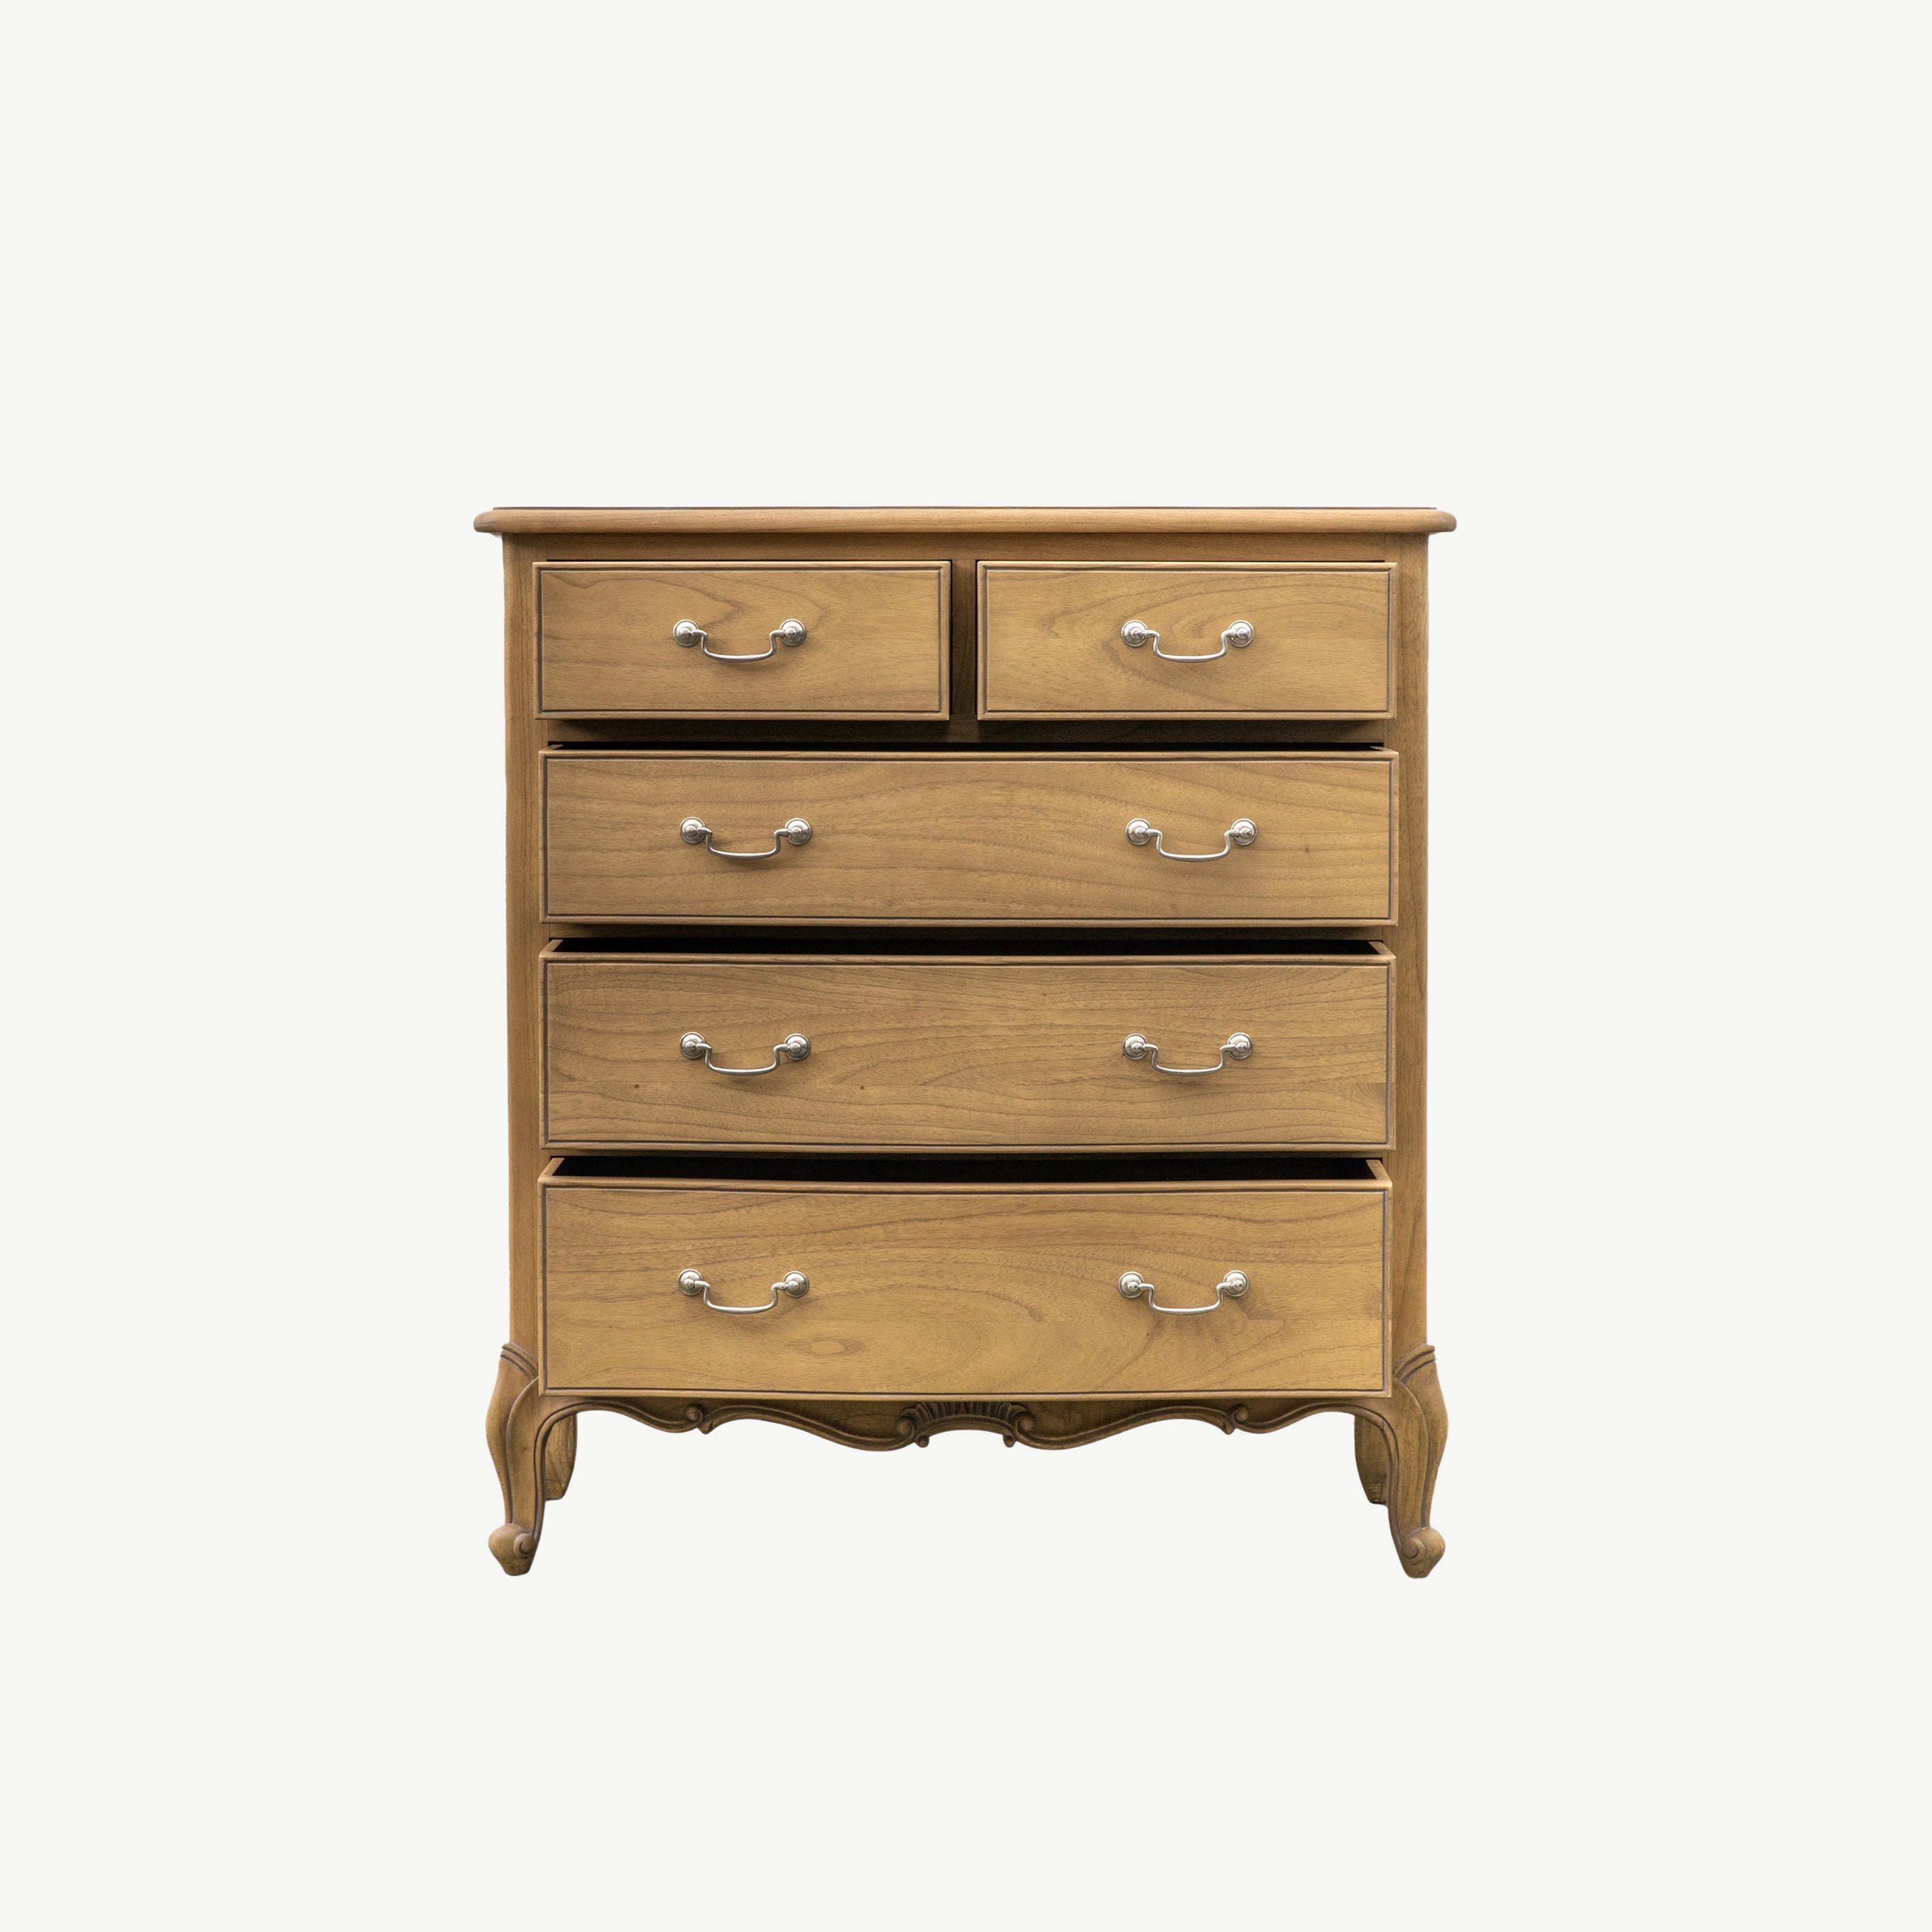 Foxley 5 Drawer Chest